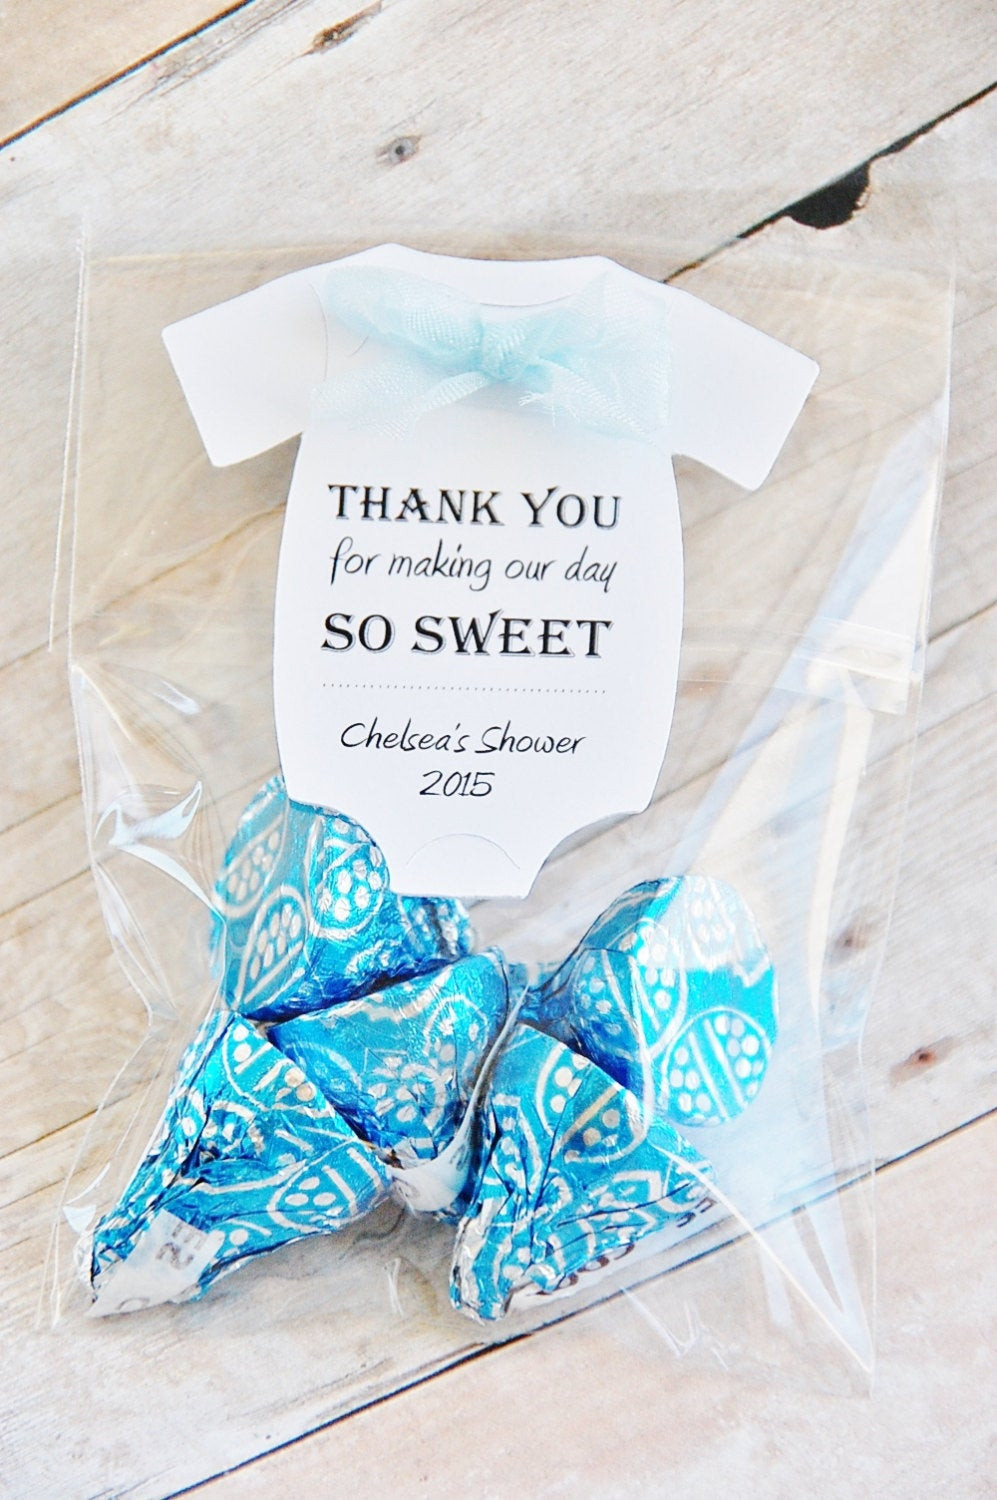 Thank You Gifts For A Baby Shower
 Thank You For Making Our Day So Sweet Baby Shower Favor Tags